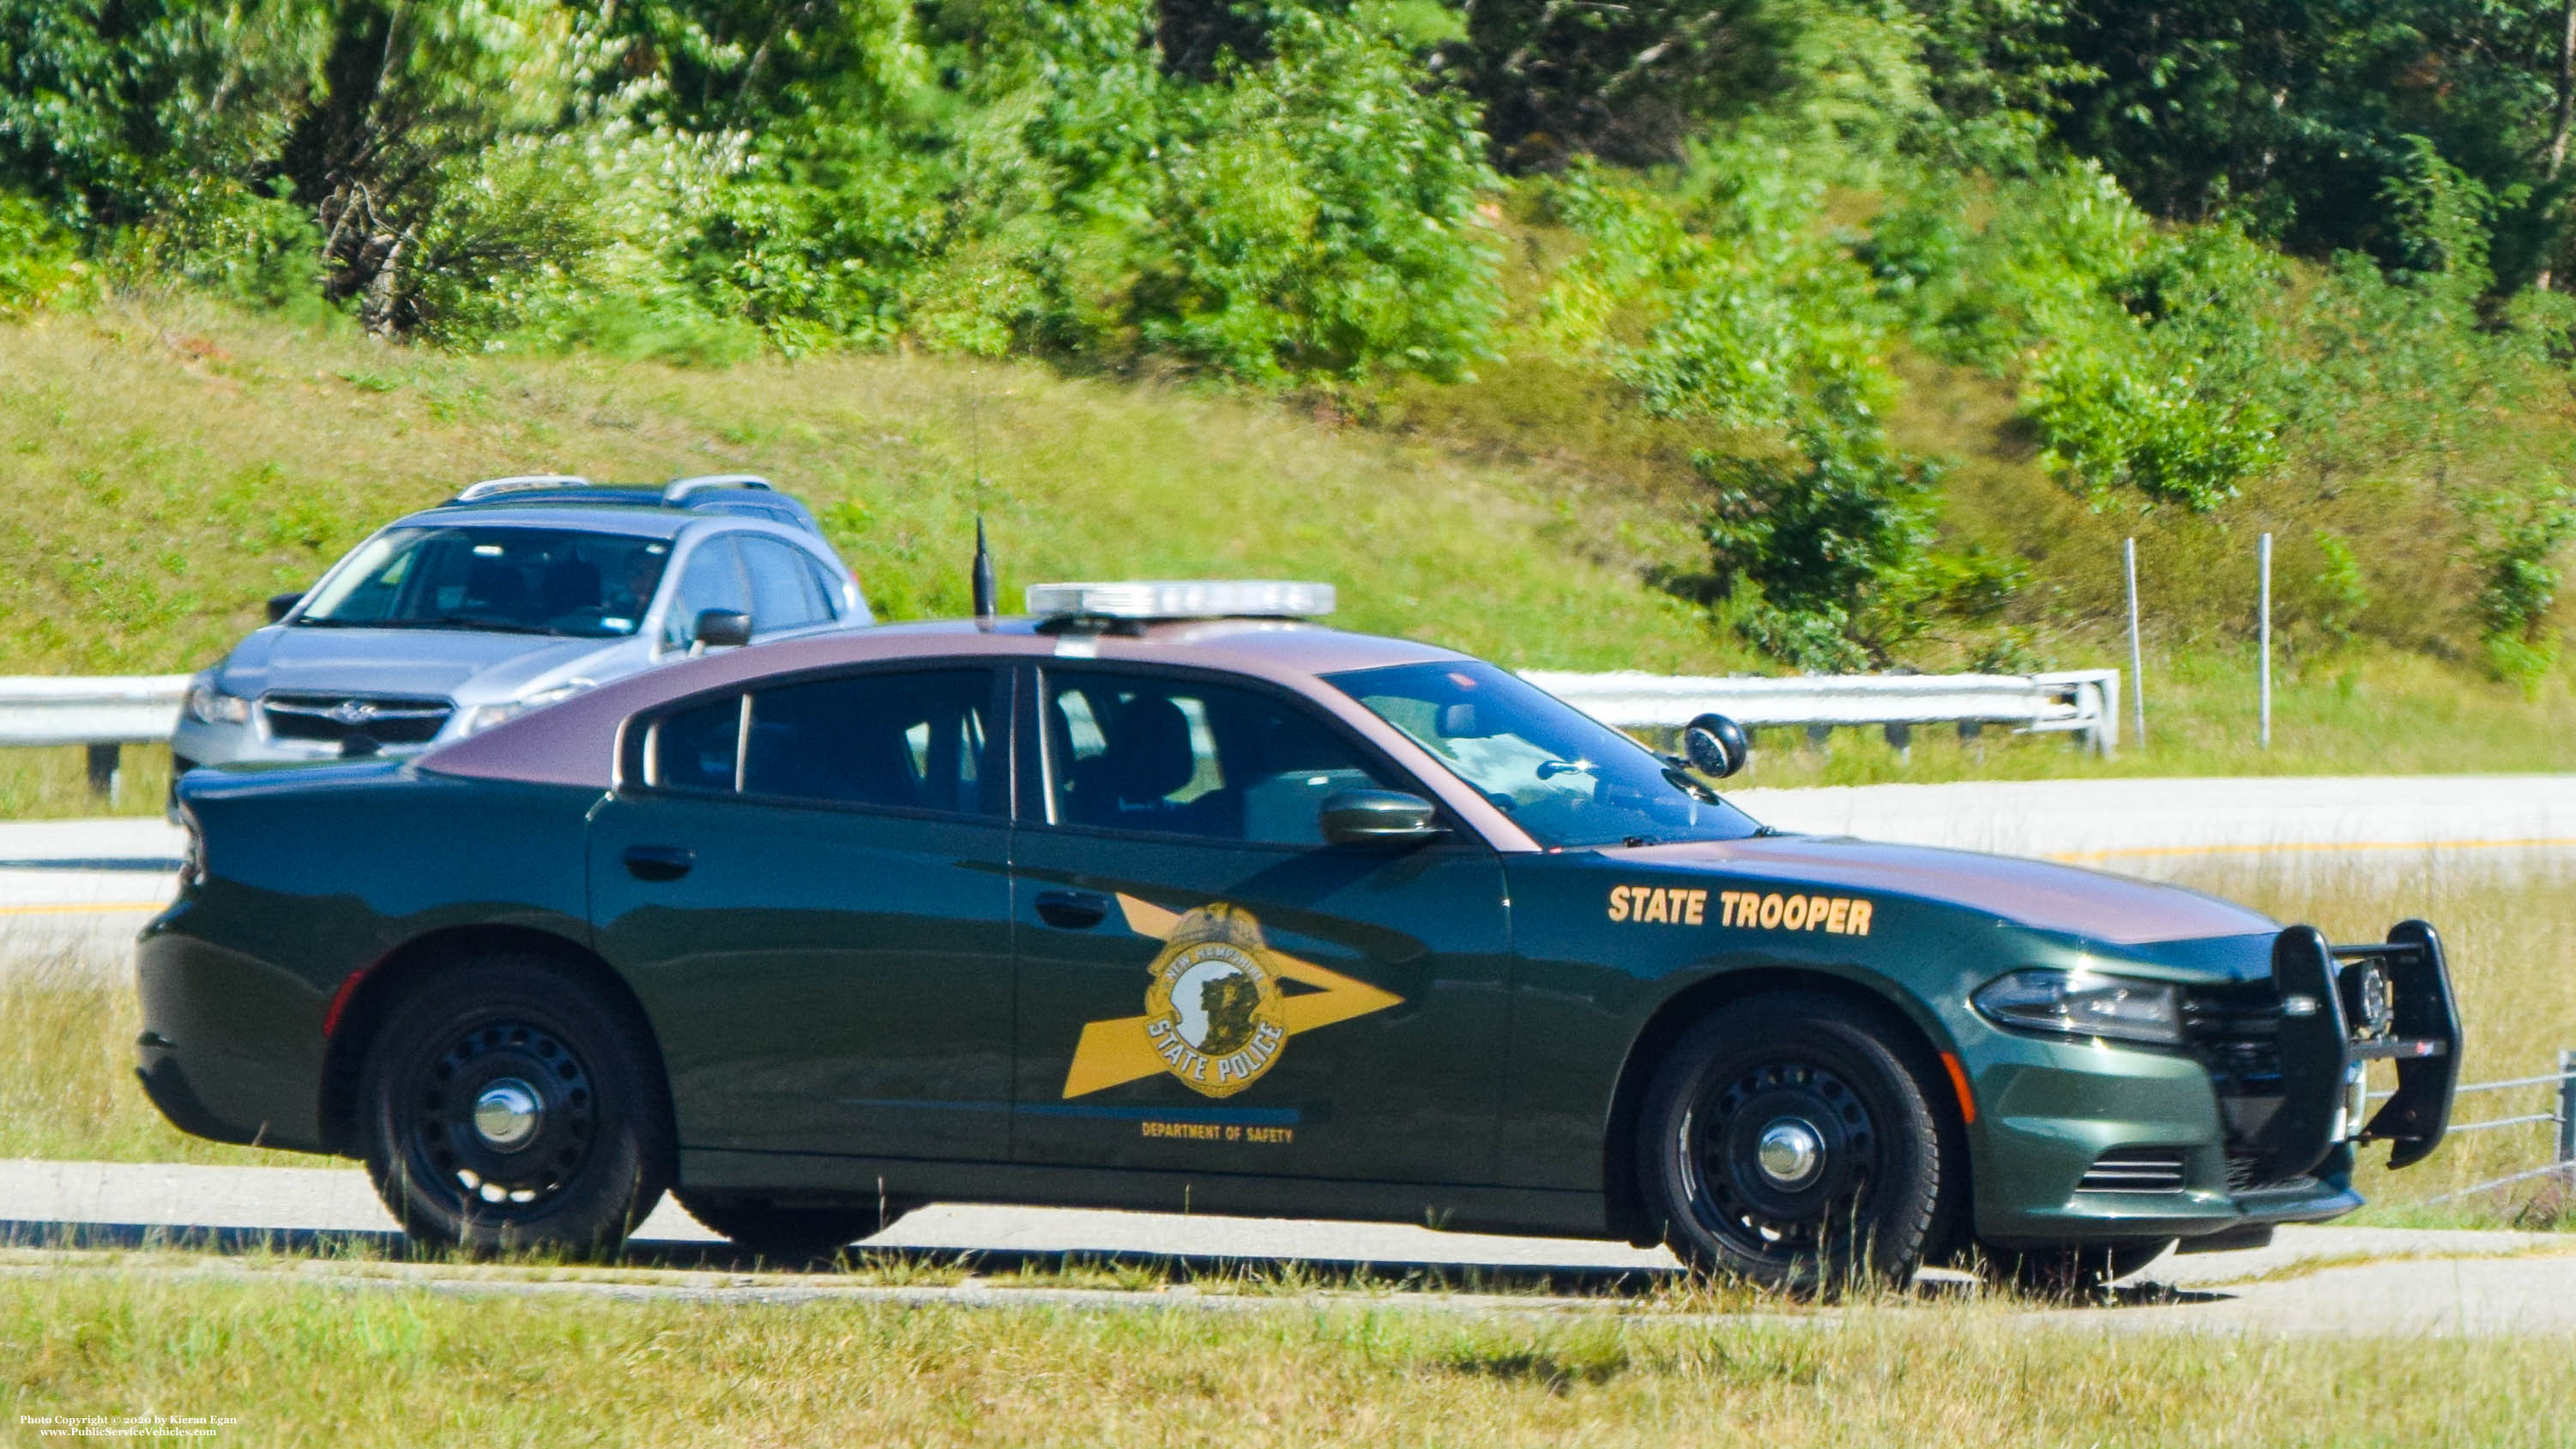 A photo  of New Hampshire State Police
            Cruiser 211, a 2015-2019 Dodge Charger             taken by Kieran Egan